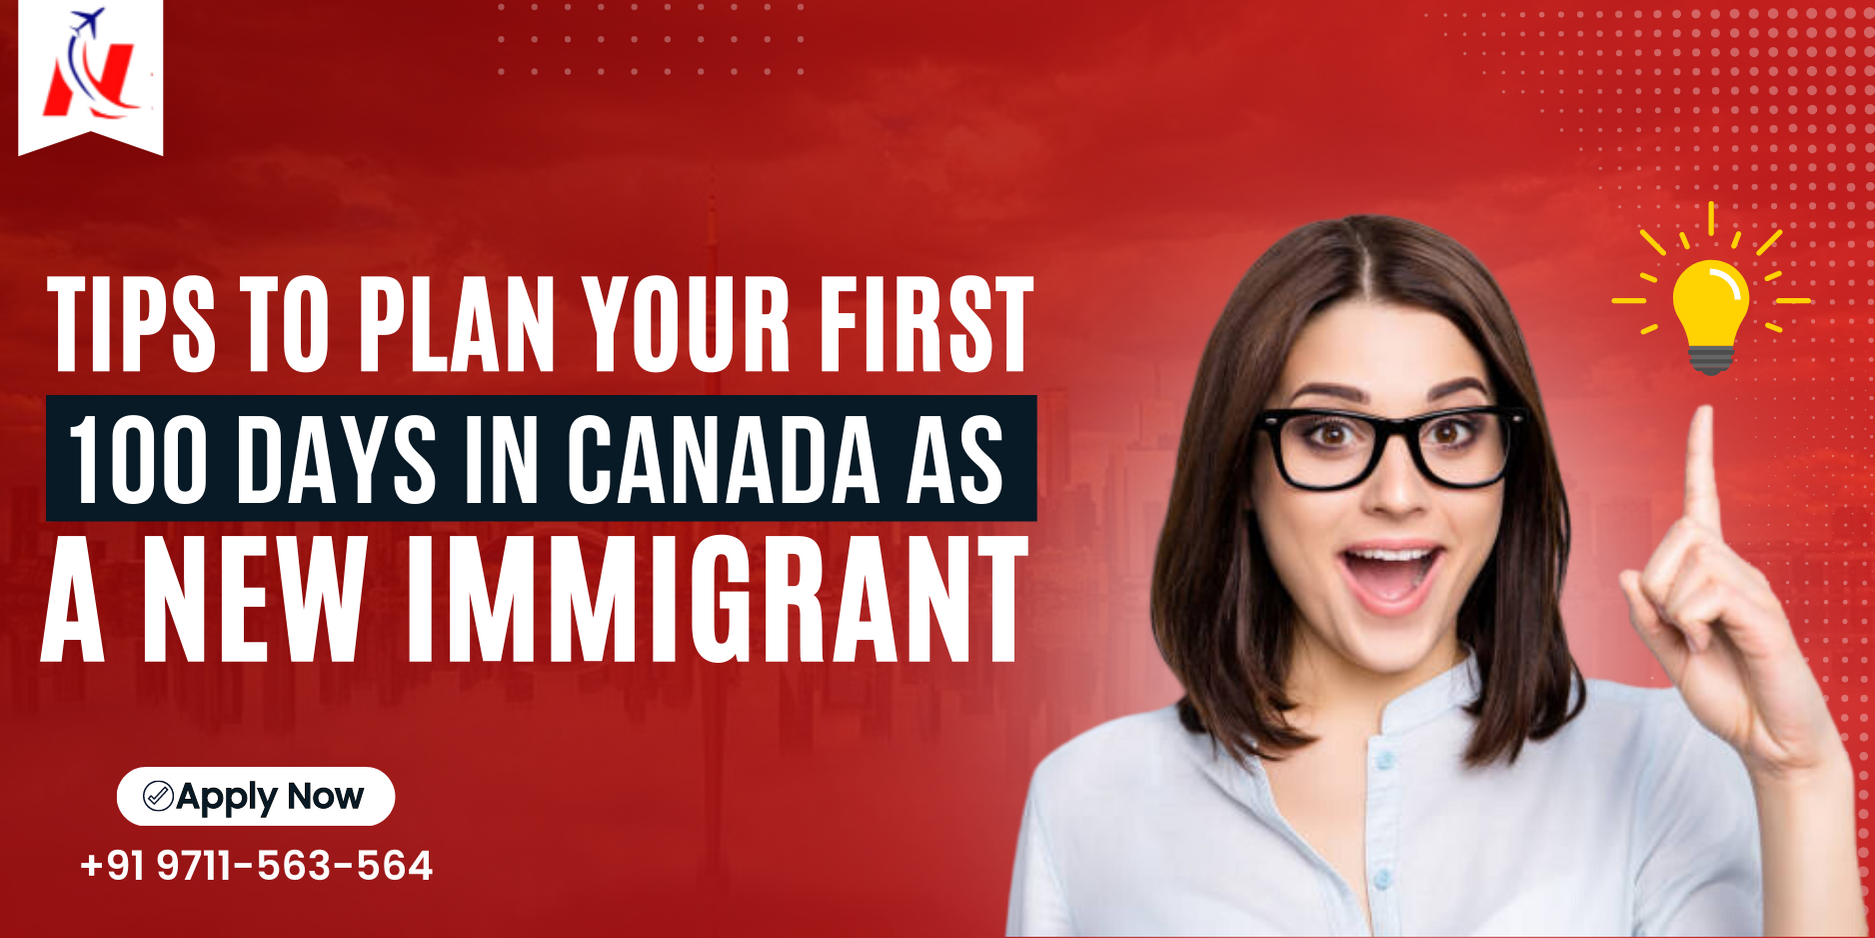 Tips to plan your first 100 days in Canada as a new immigrant